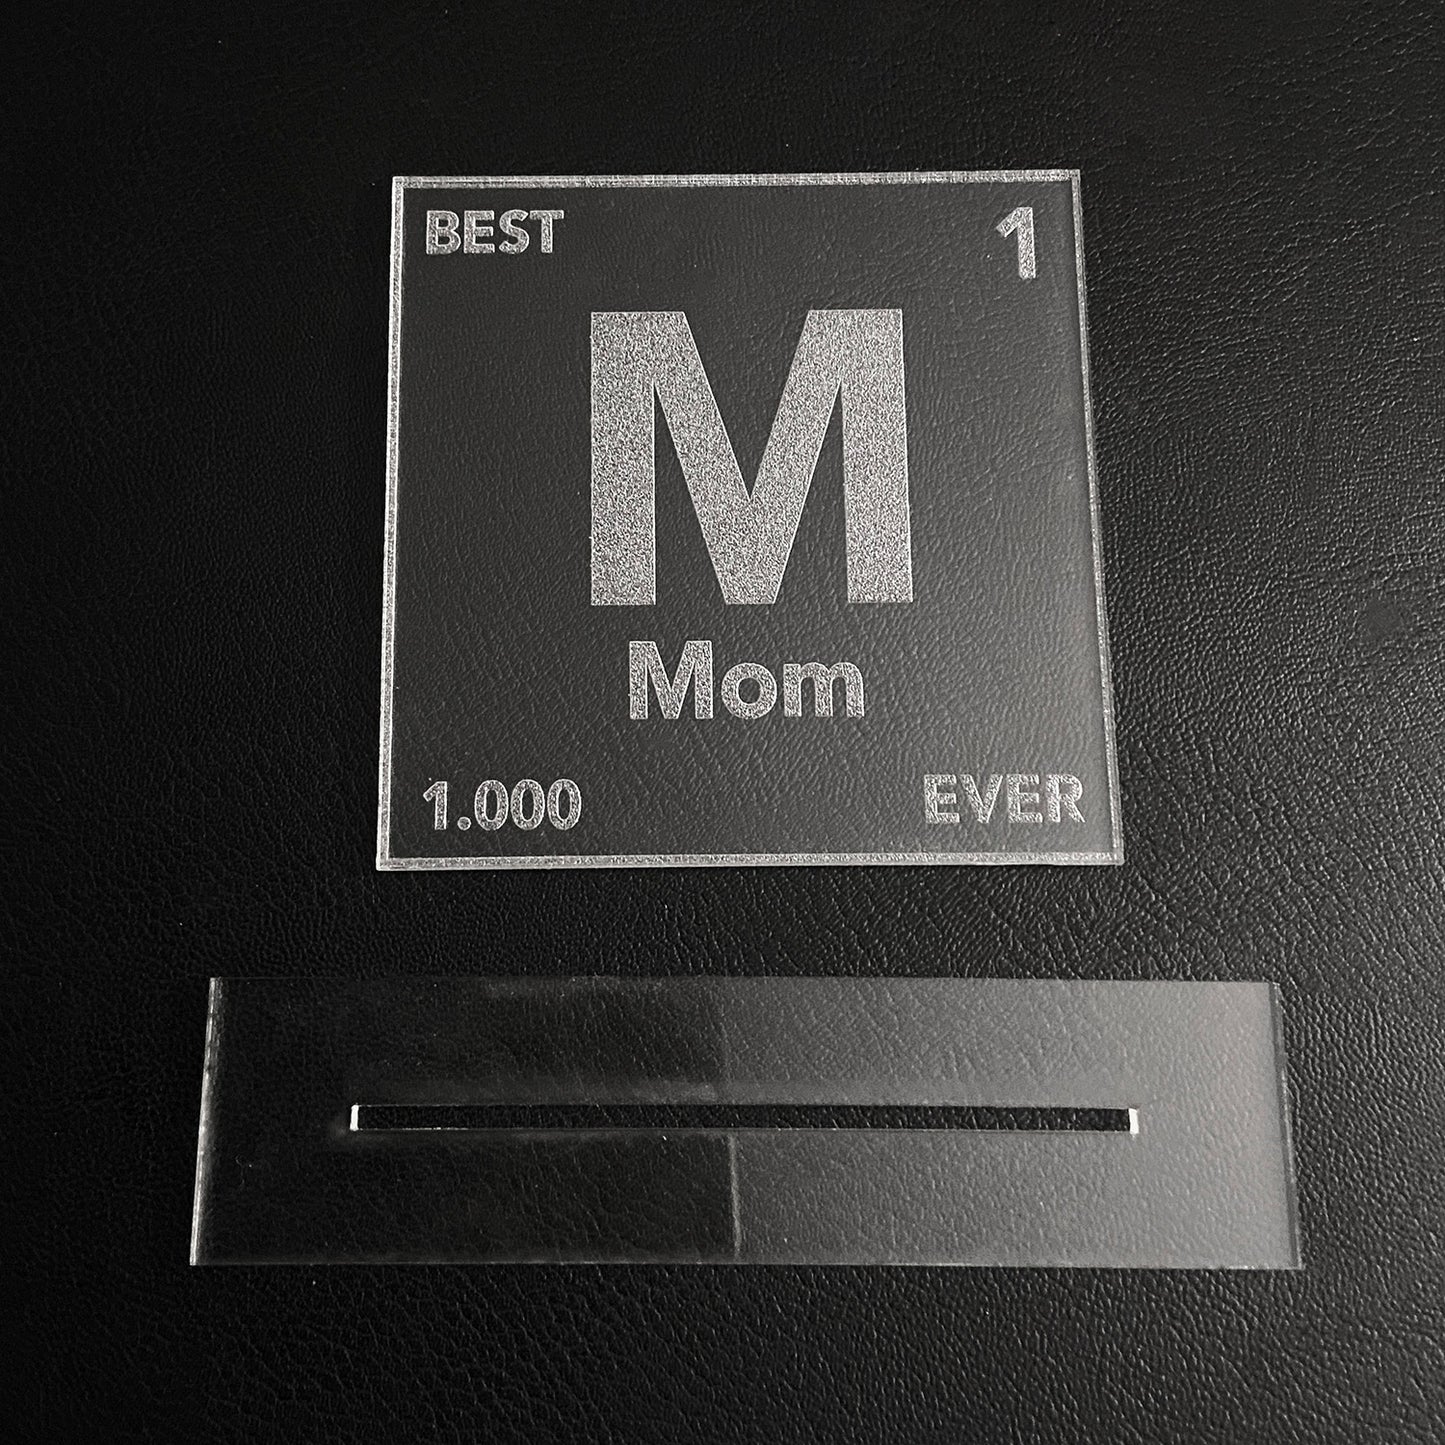 Mom Element Art with Stand